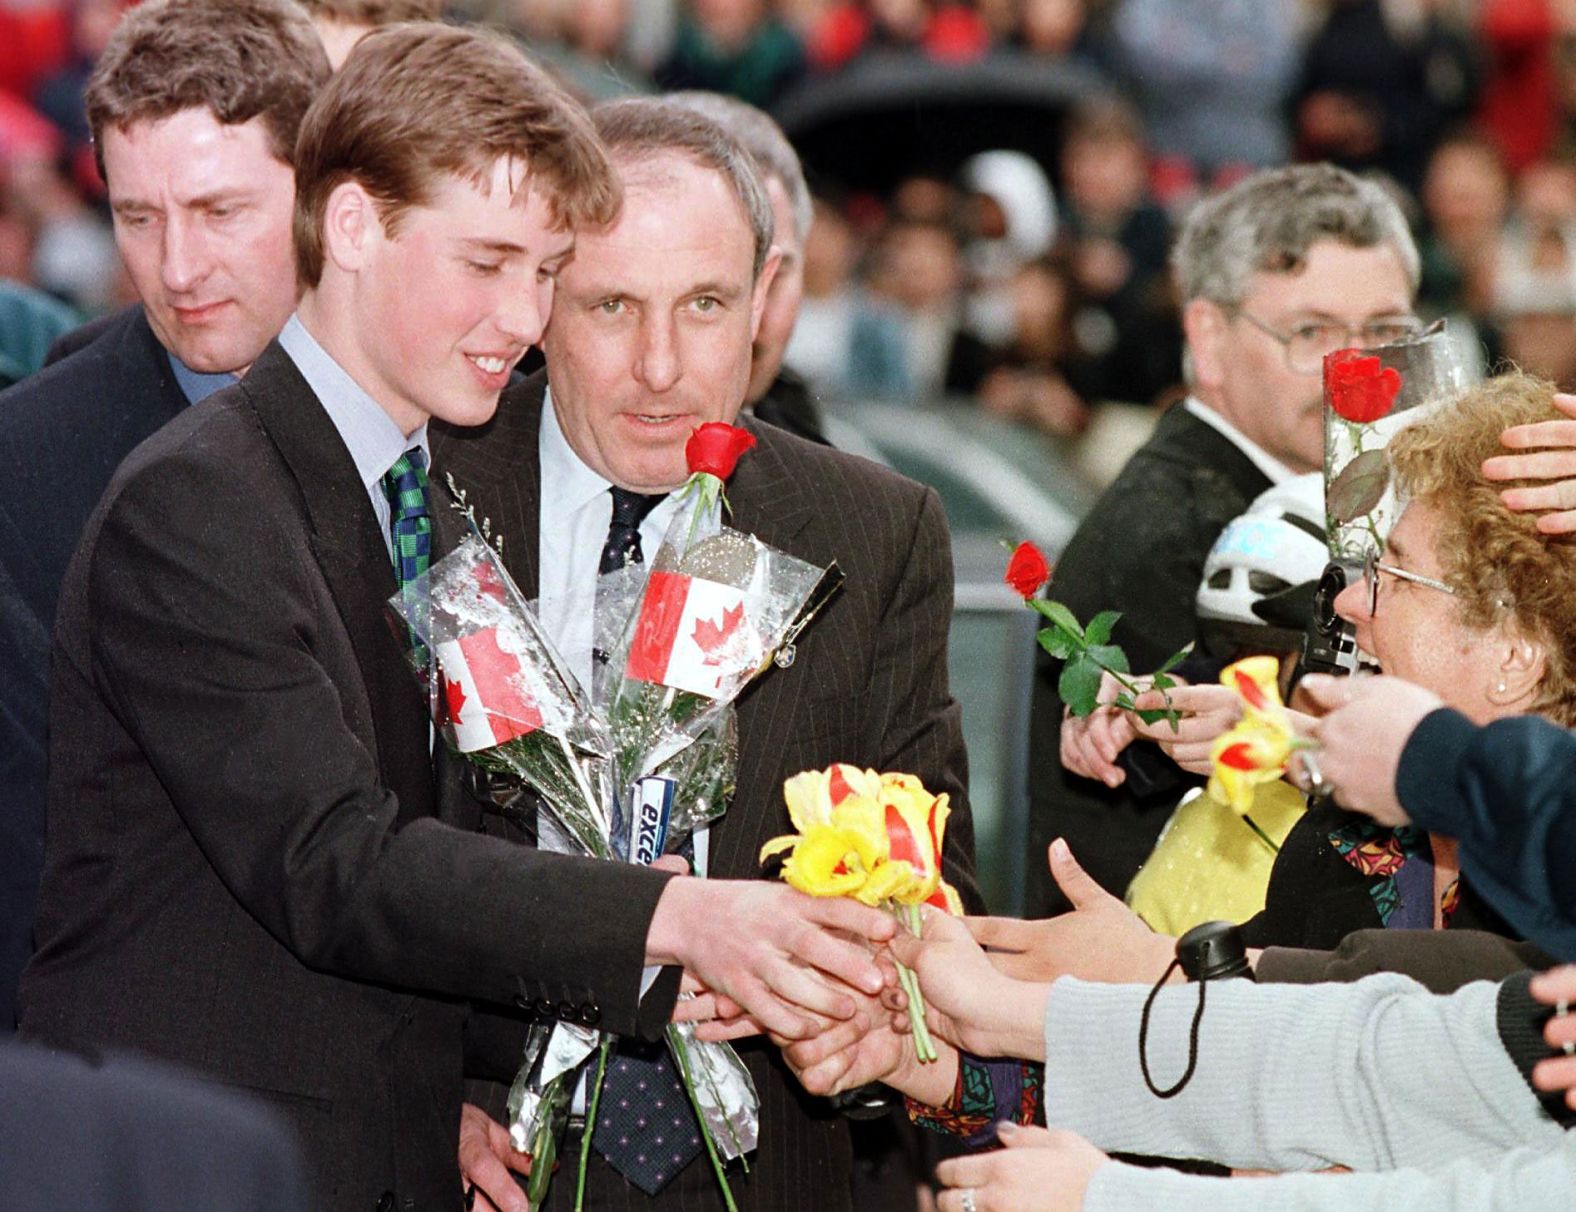 Prince William receives flowers from an adoring crowd in Vancouver, British Columbia, in 1998. He was on a weeklong vacation with his father and brother, though they also made time for official engagements.